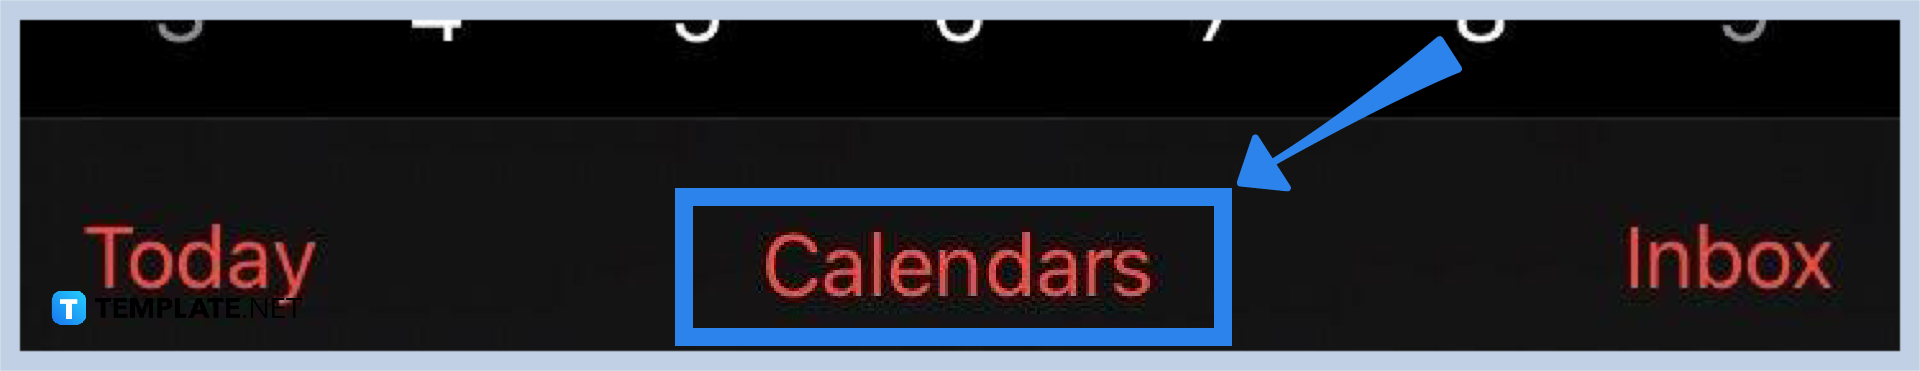 How to Sync Google Calendar with iPhone-Step 5